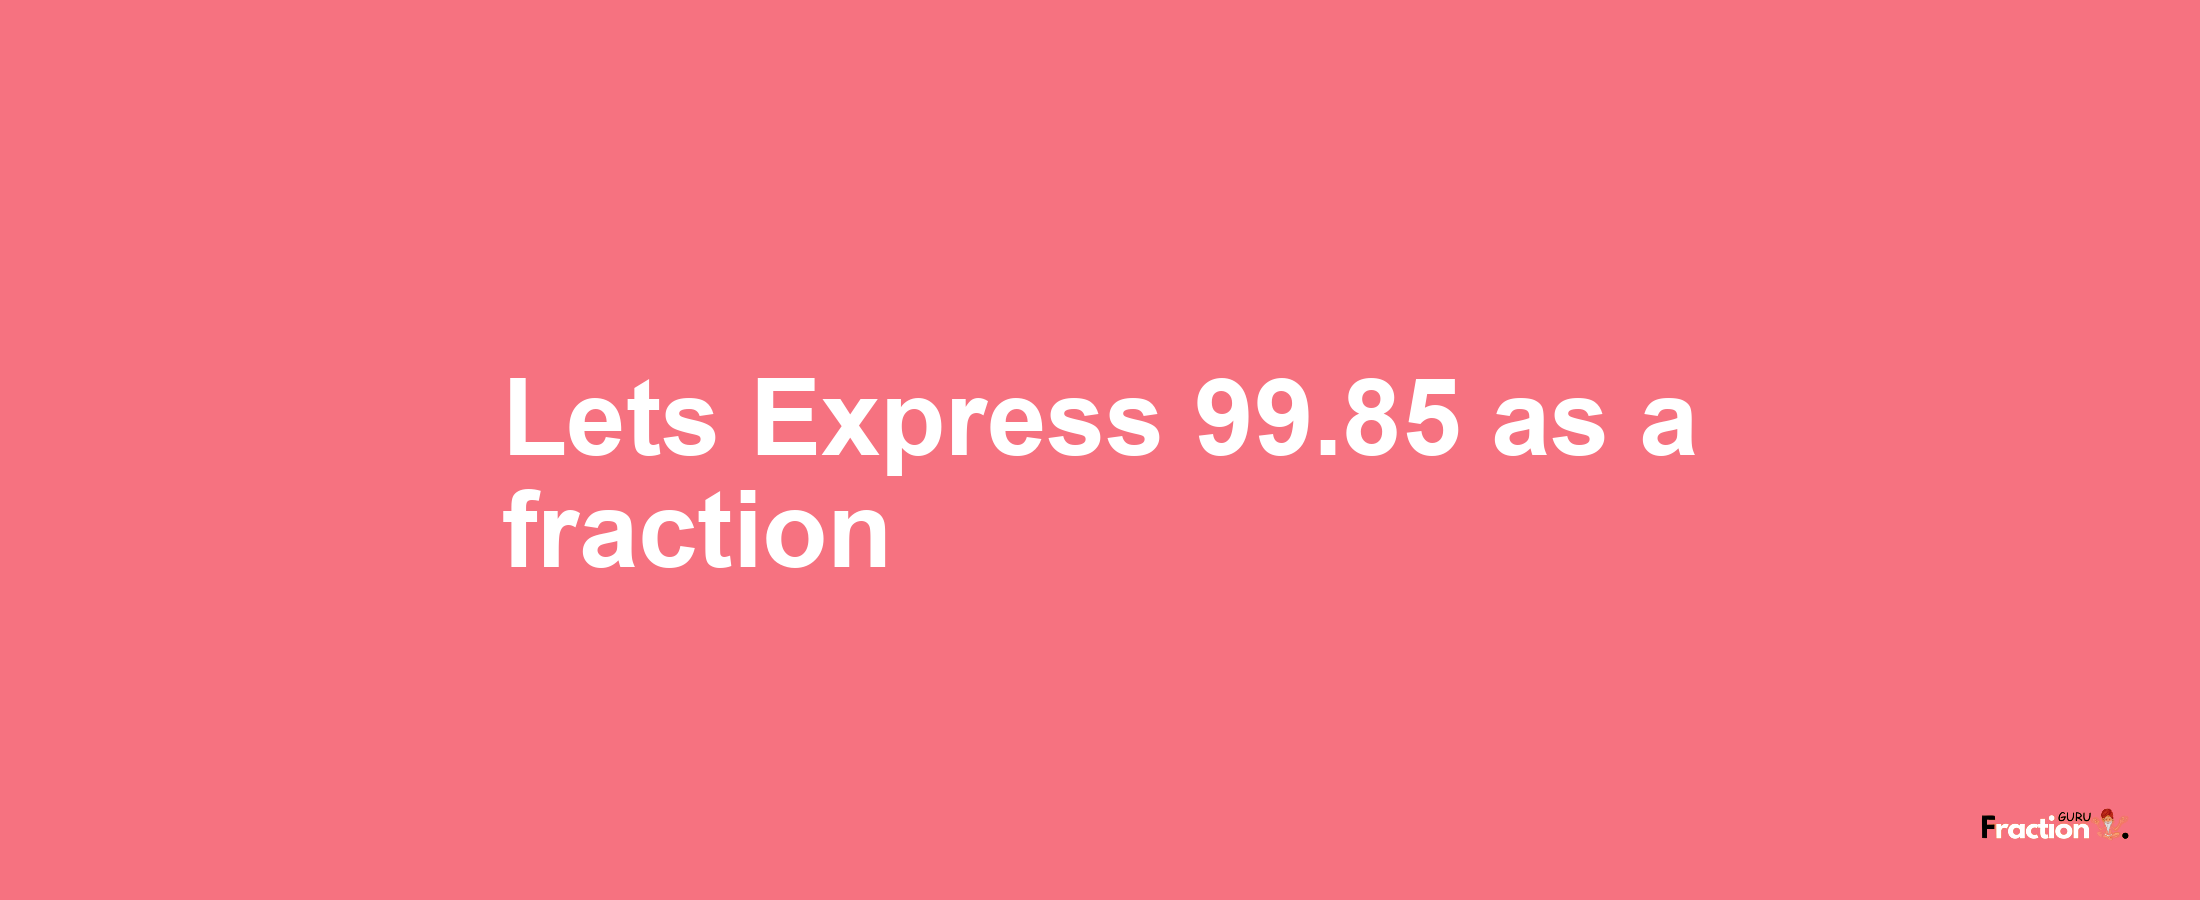 Lets Express 99.85 as afraction